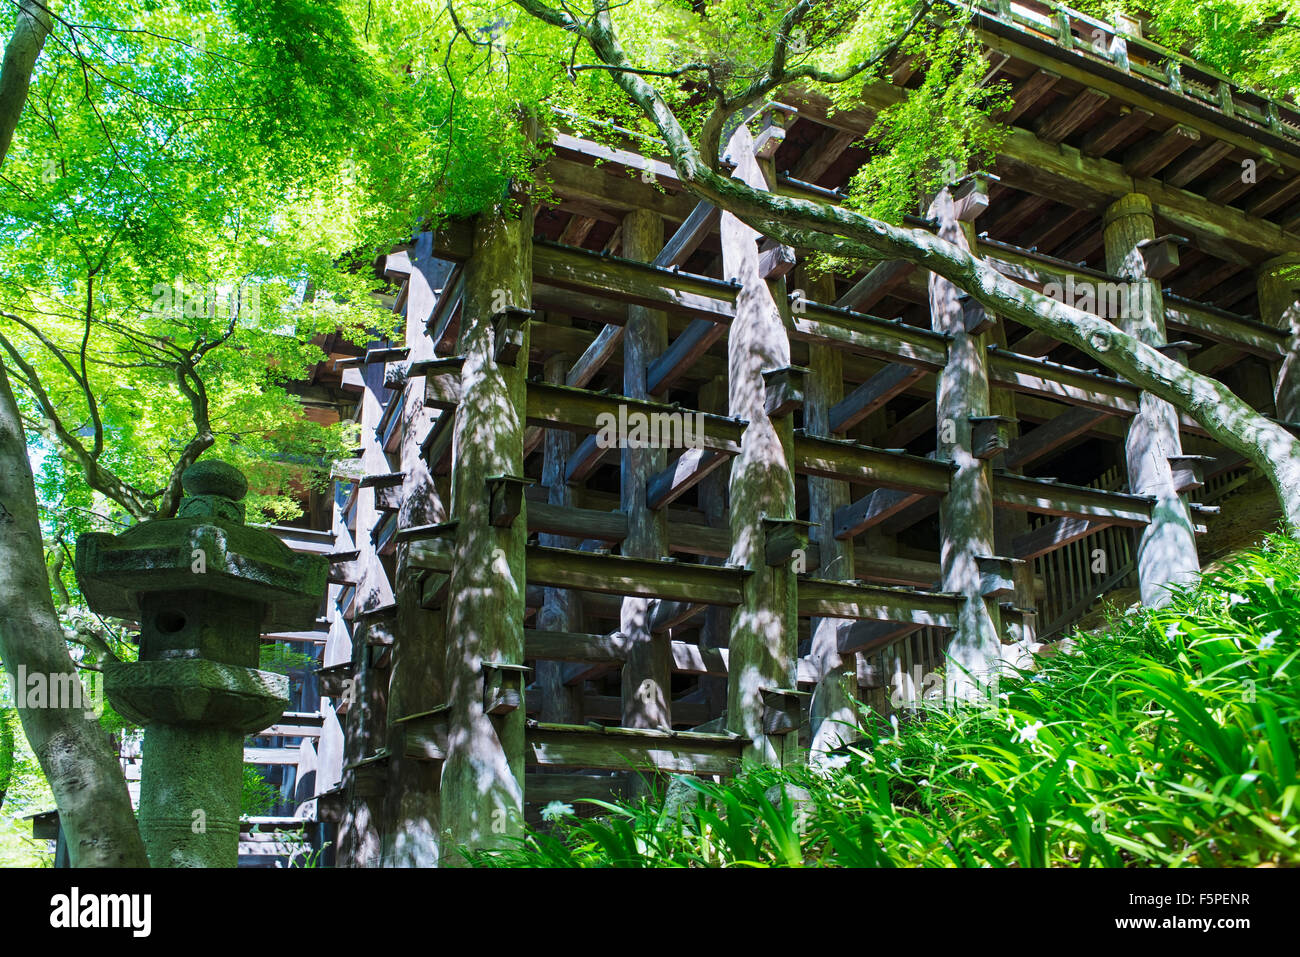 The wooden foundations of Kiyomizu-dera Temple in Kyoto Stock Photo